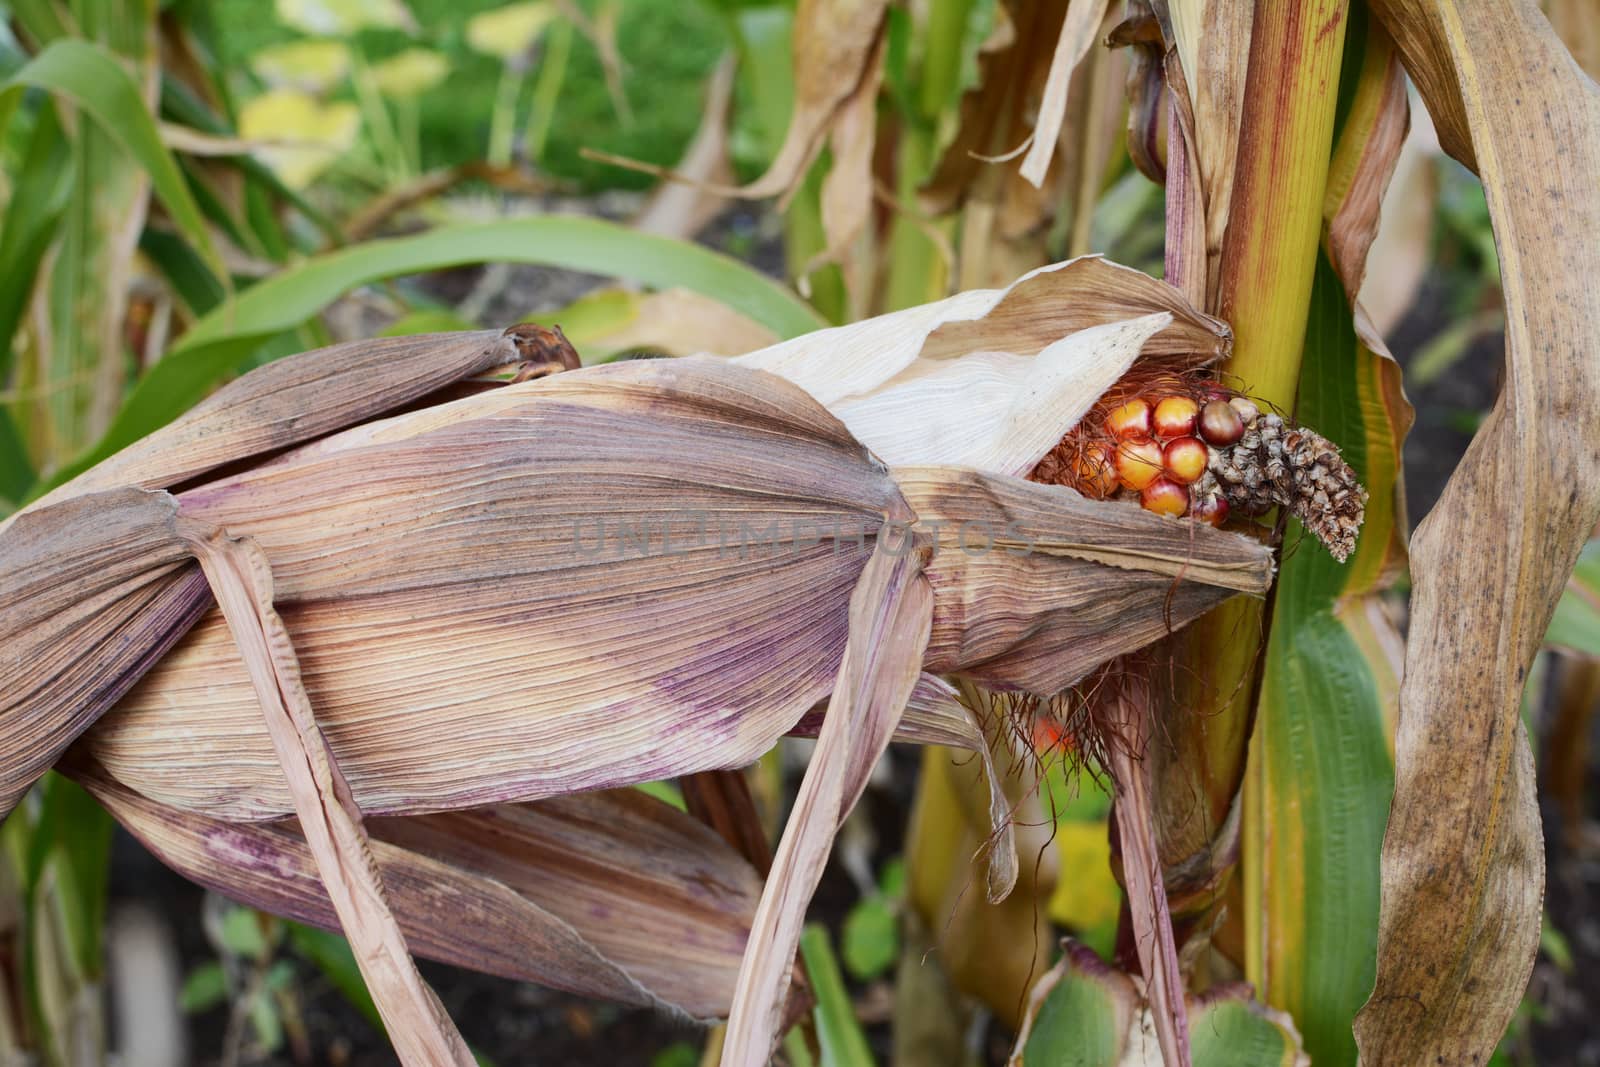 Dried, papery husks around a Fiesta corn cob growing in a patch of maize